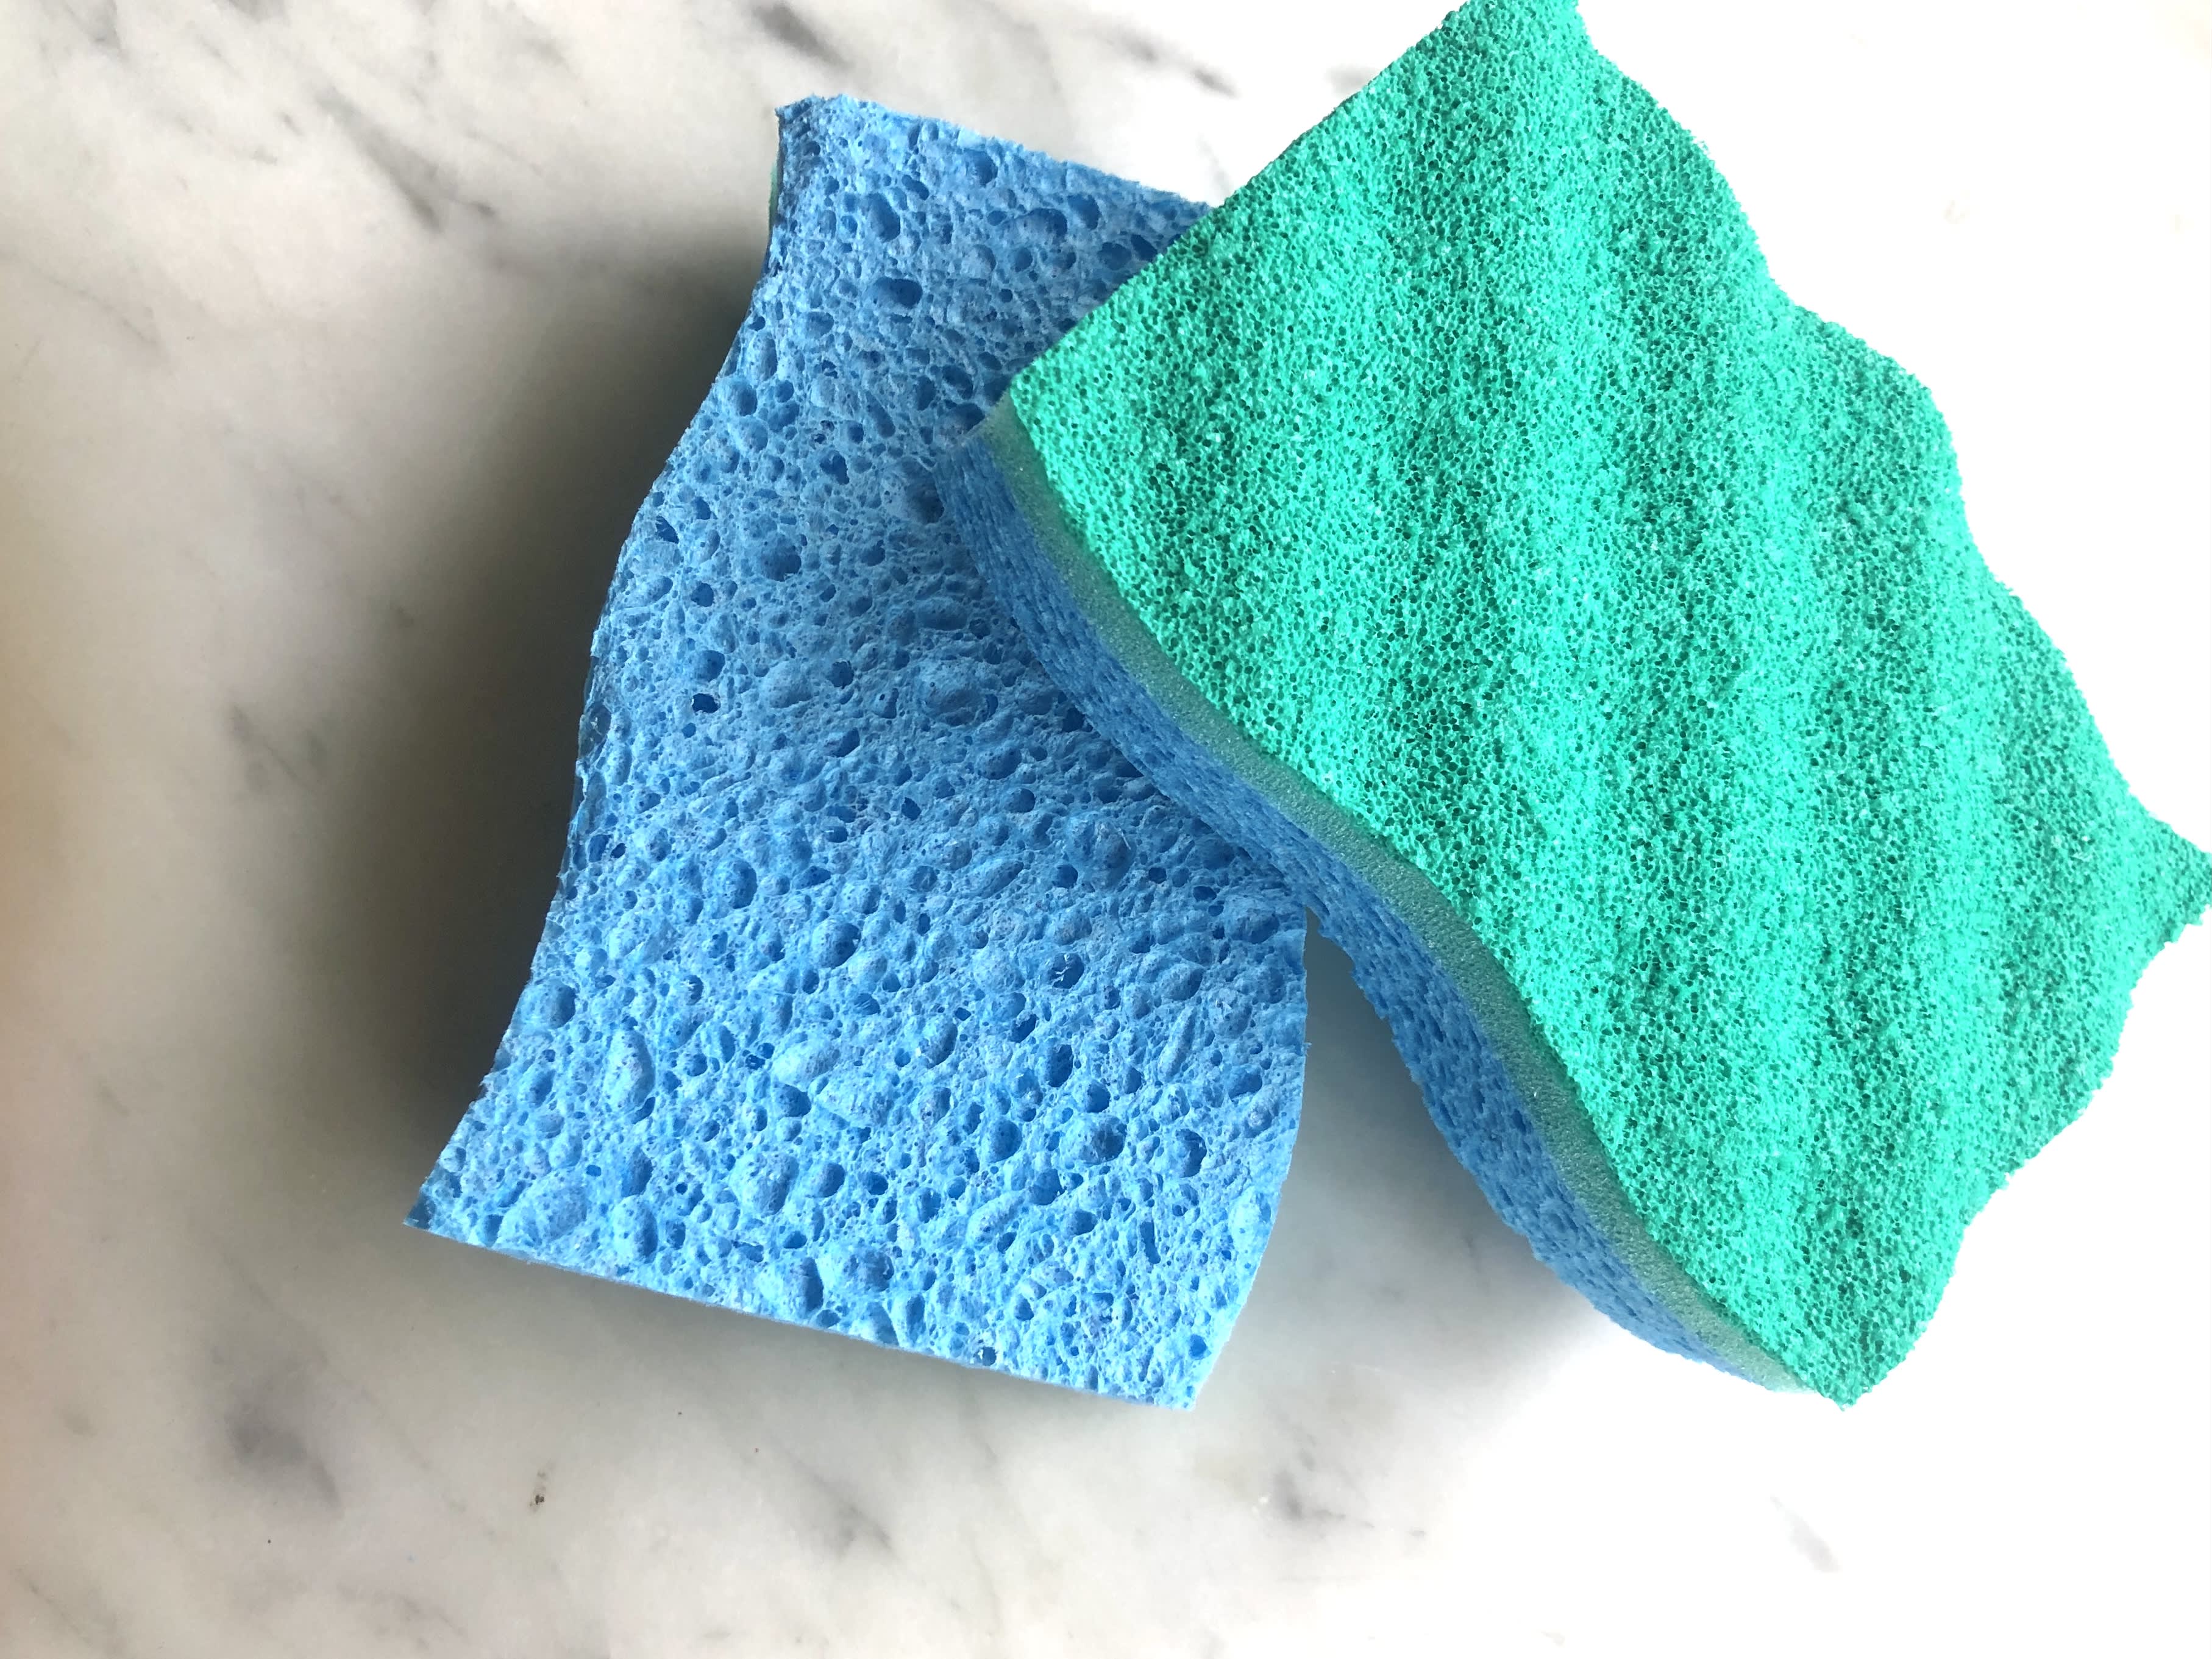 50 Green and Yellow Sponges Kitchen Scrubbers Cleaning Dishwashing Scouring  Pads - 1 Super Party